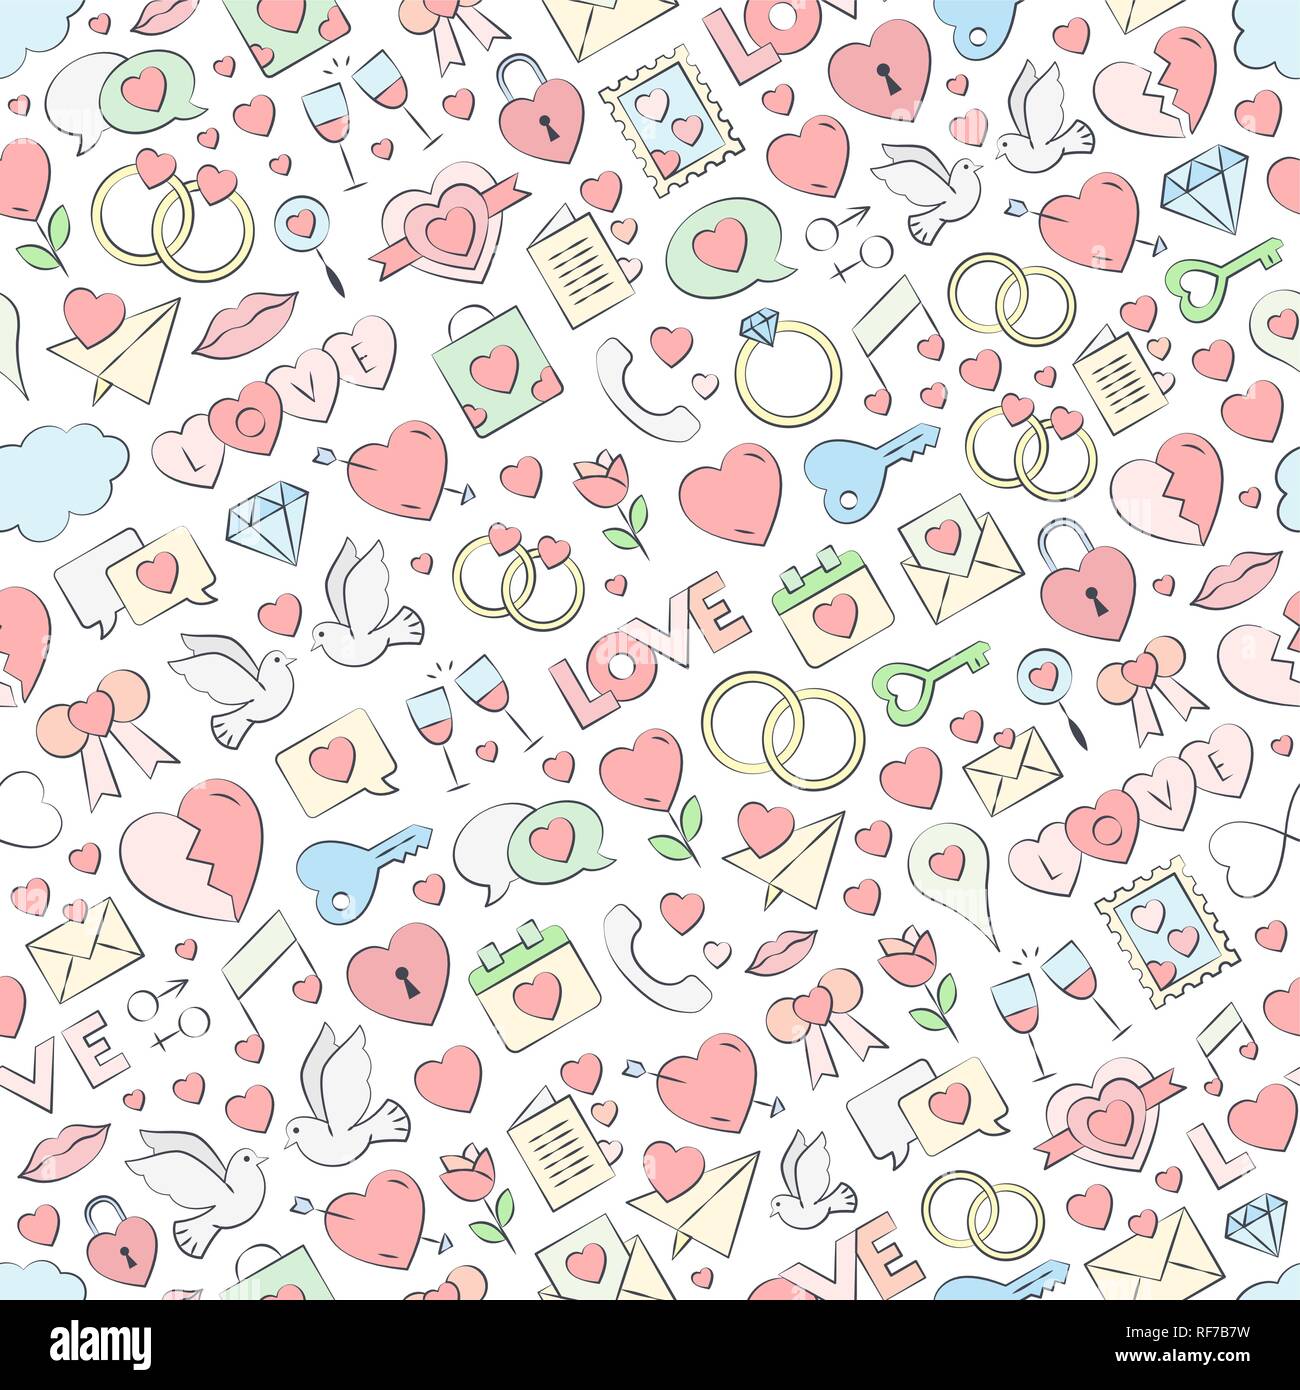 Hand drawn seamless love pattern vector illustration. Vector repeating texture for Valentine's Day - love symbols collection background Stock Vector